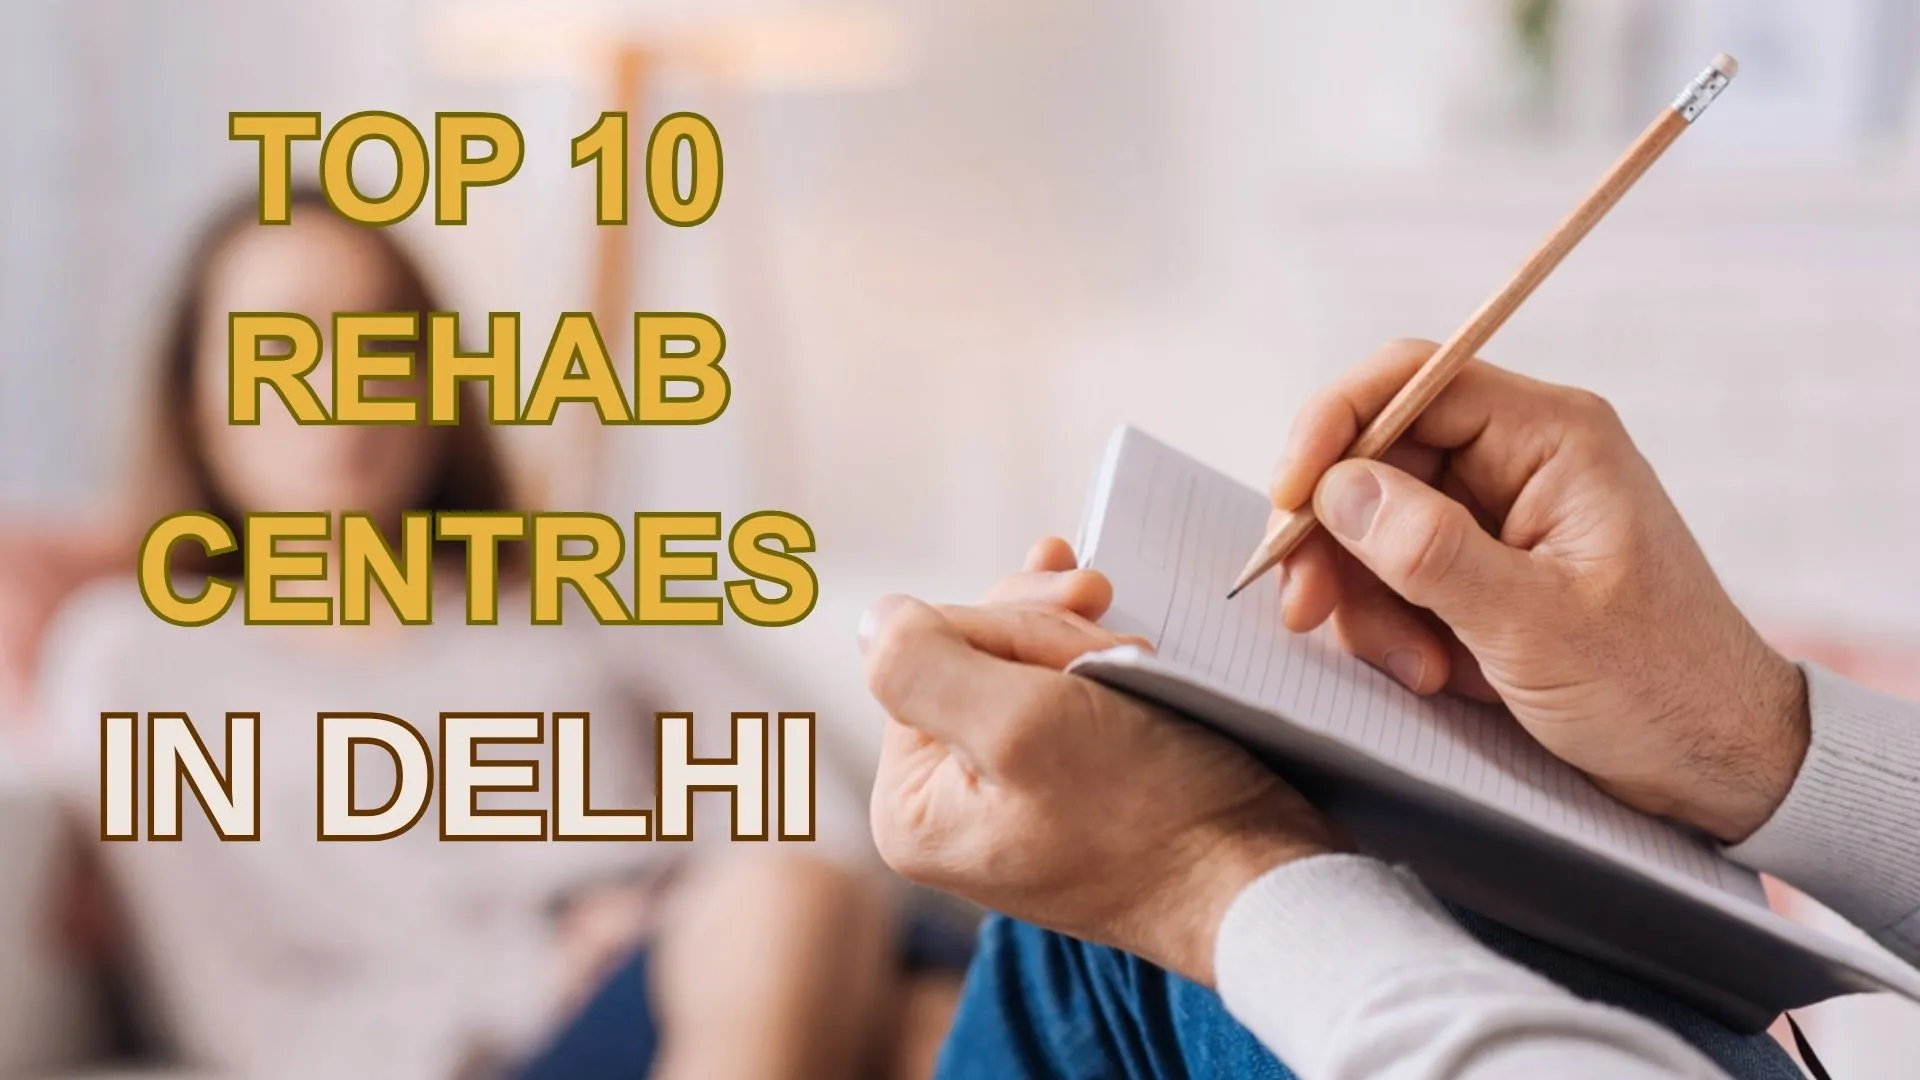 Top 10 Rehab Centers in Delhi: Finding the Best Psychiatrists